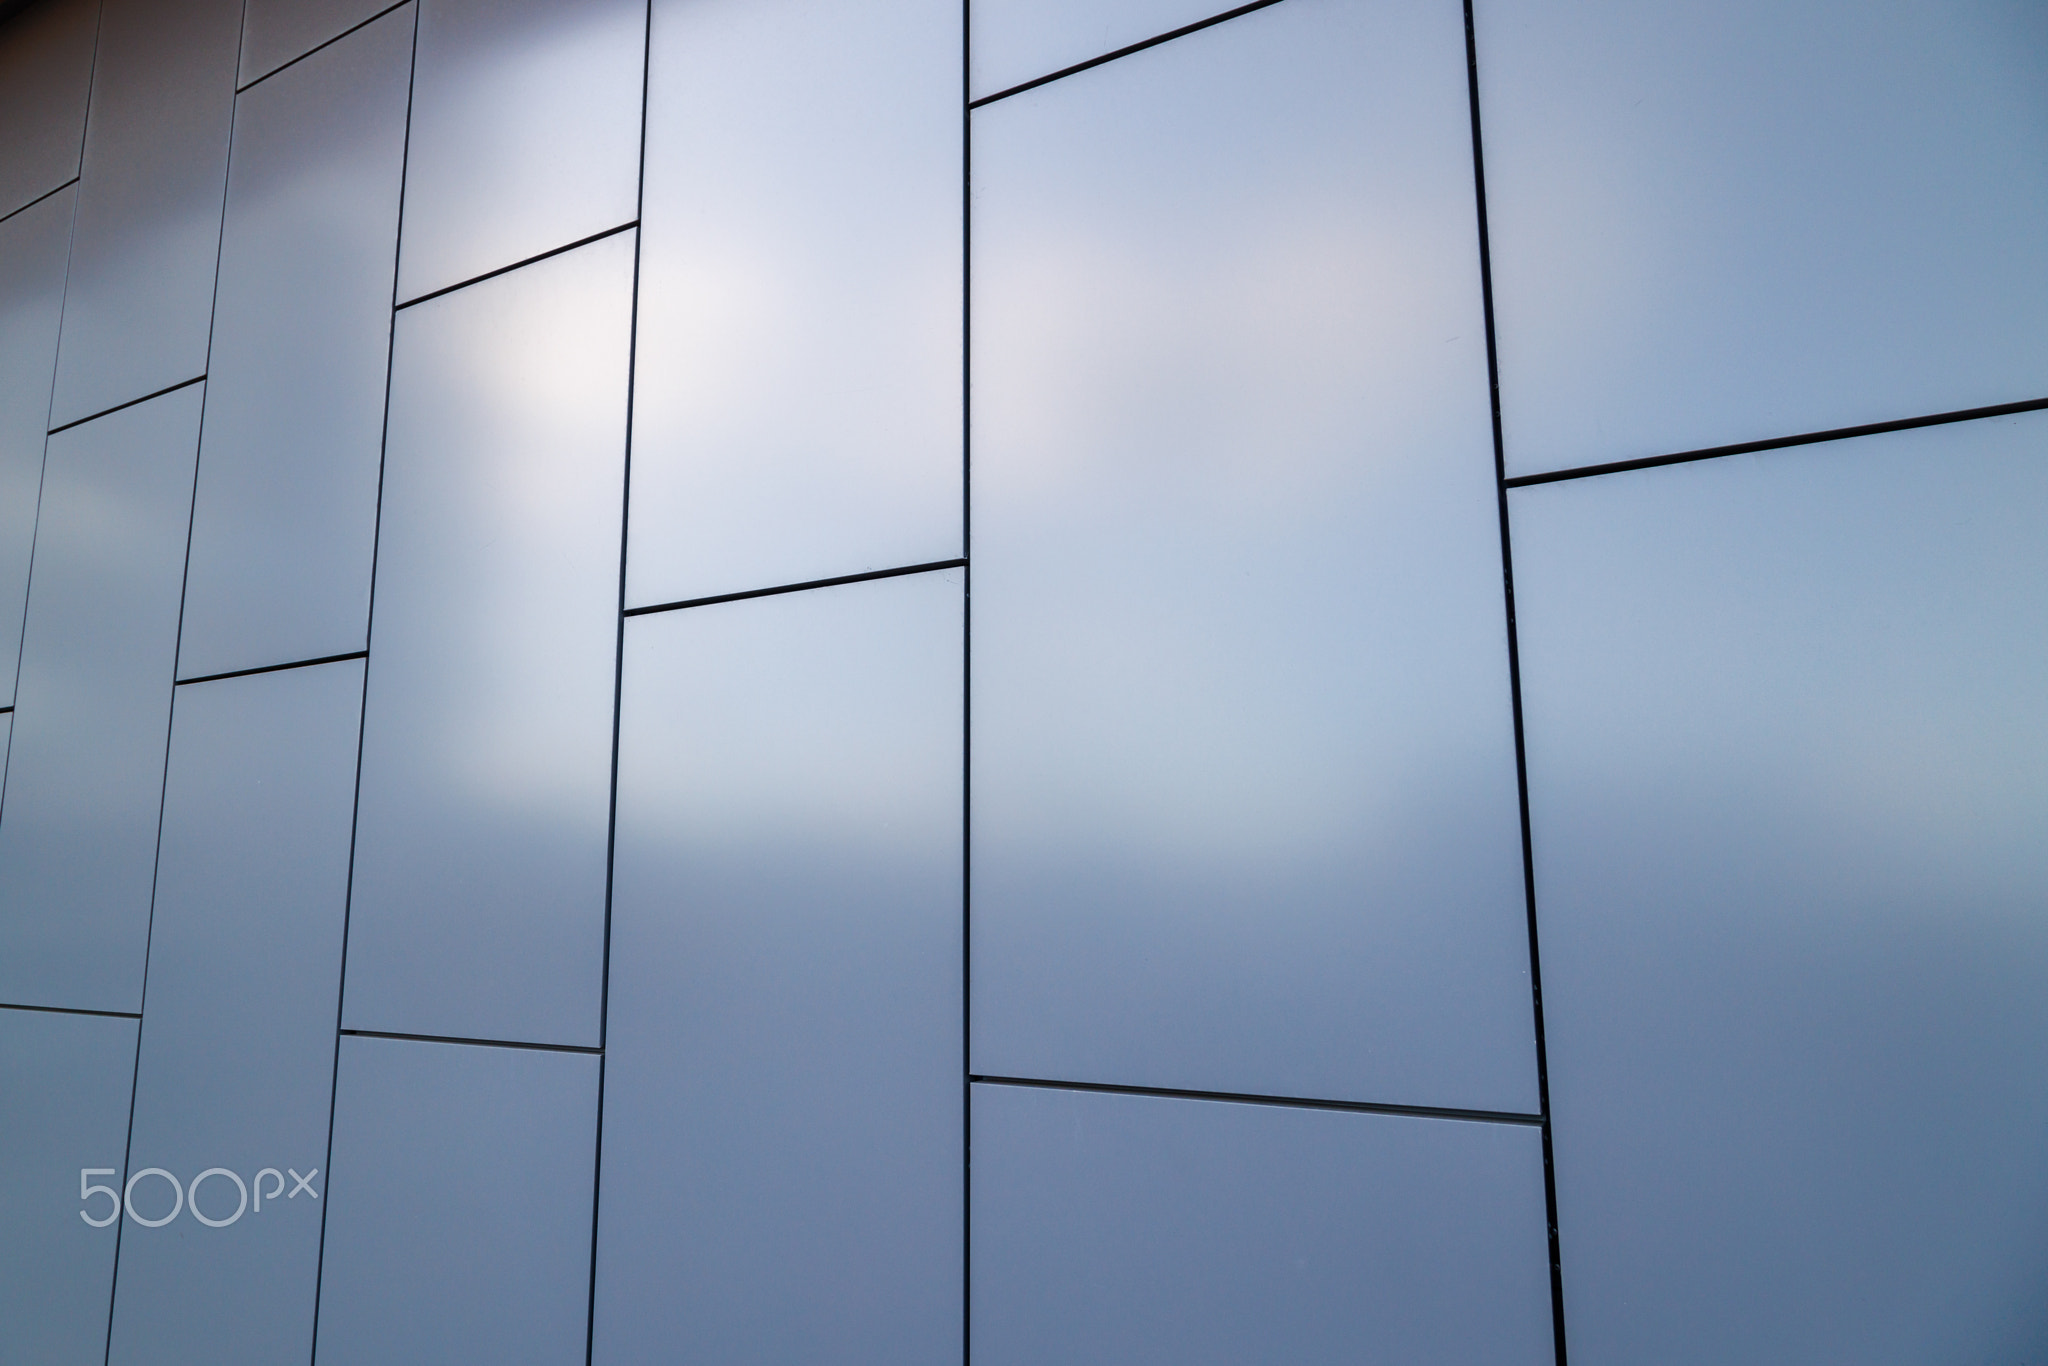 Outside wall of building covered with grayish blue painted metal rectangular panels - full-frame